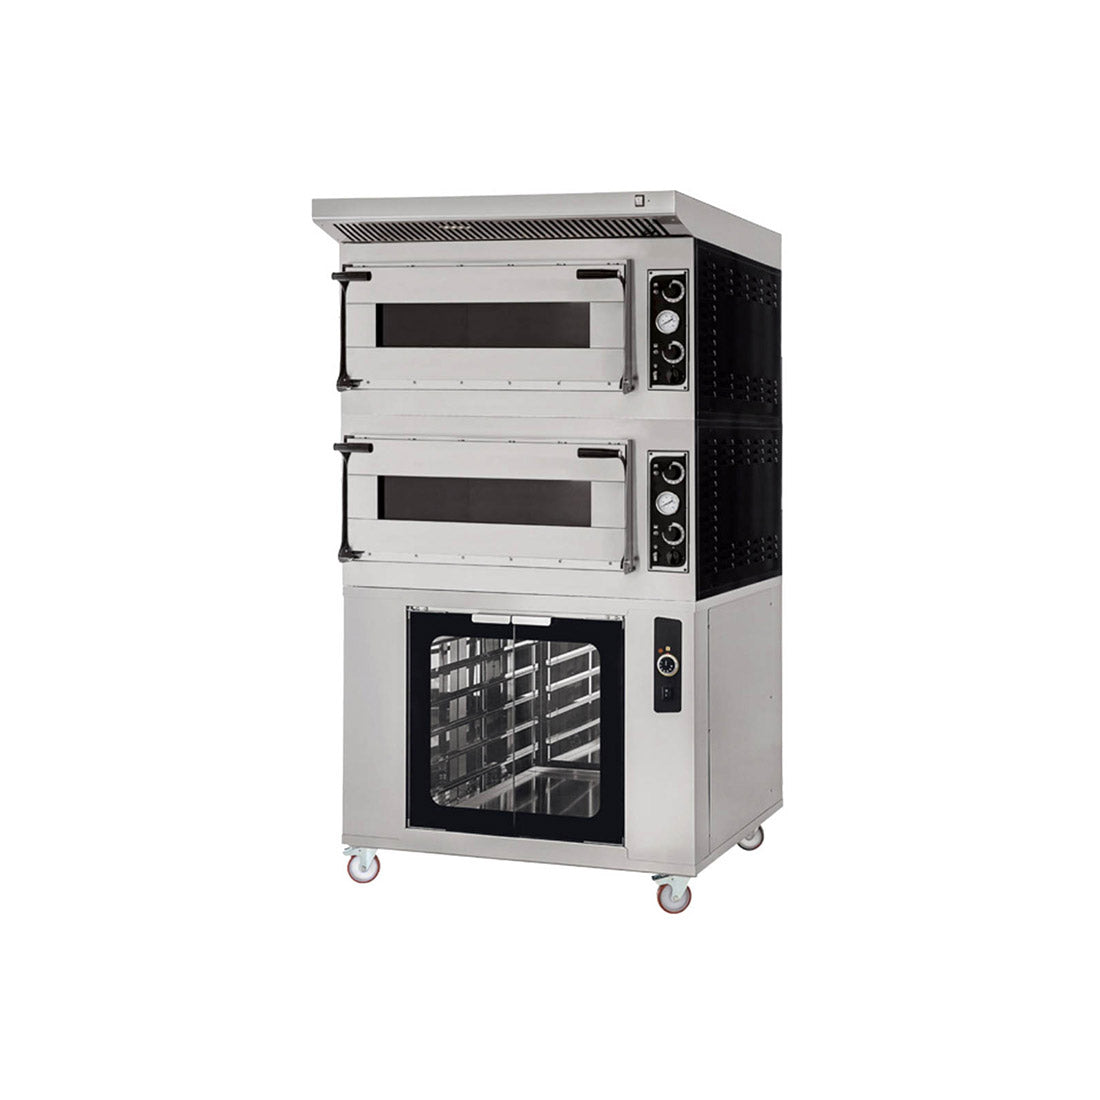 Stainless Steel Hood with Motor and Speed Regulator- KT4-44MS